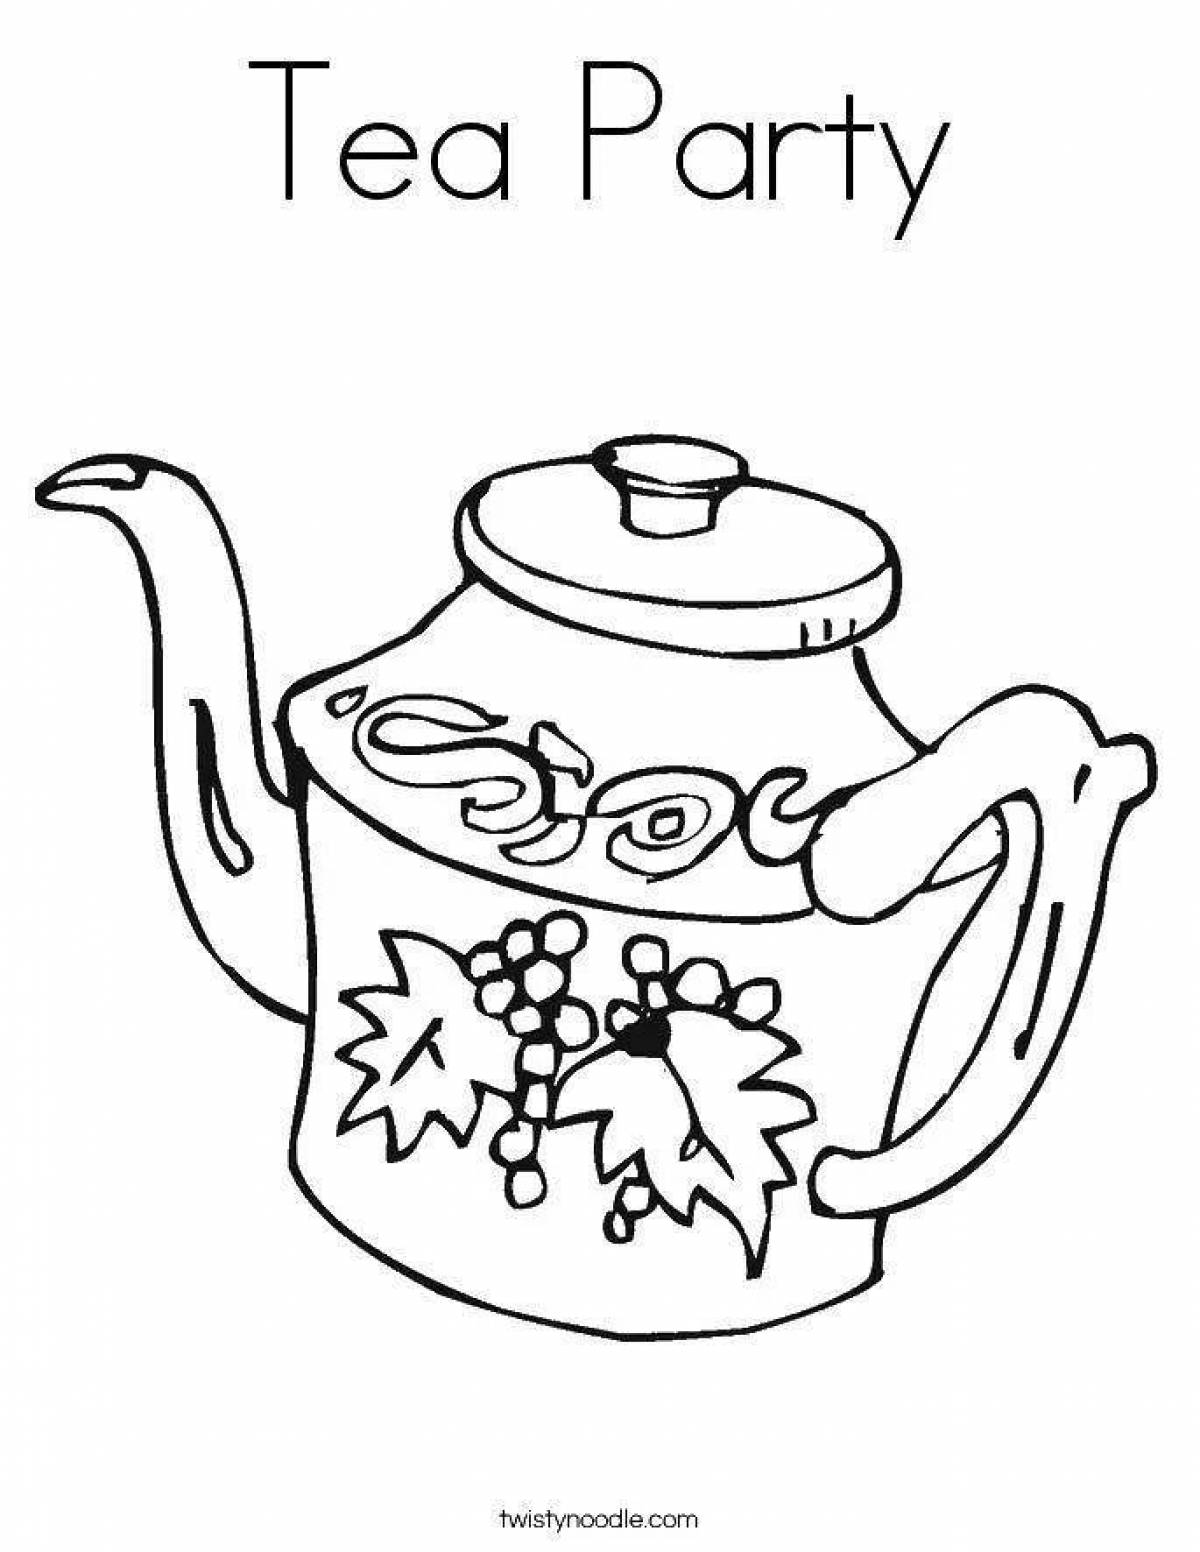 Fancy teapot coloring page for kids